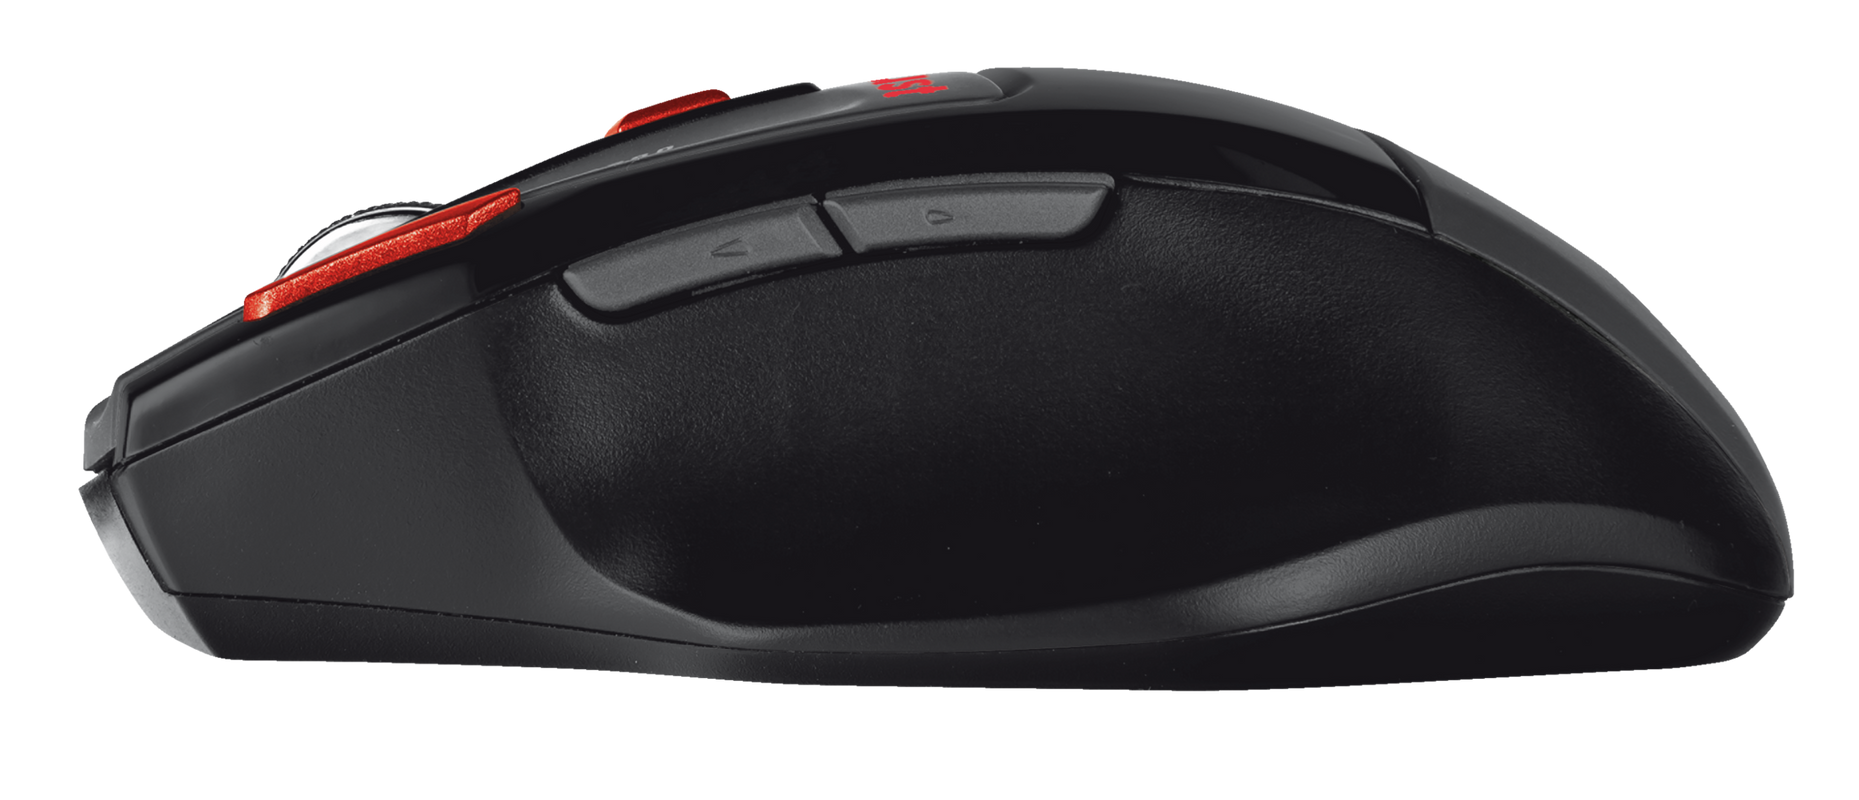 GXT 120 Wireless Gaming Mouse-Side